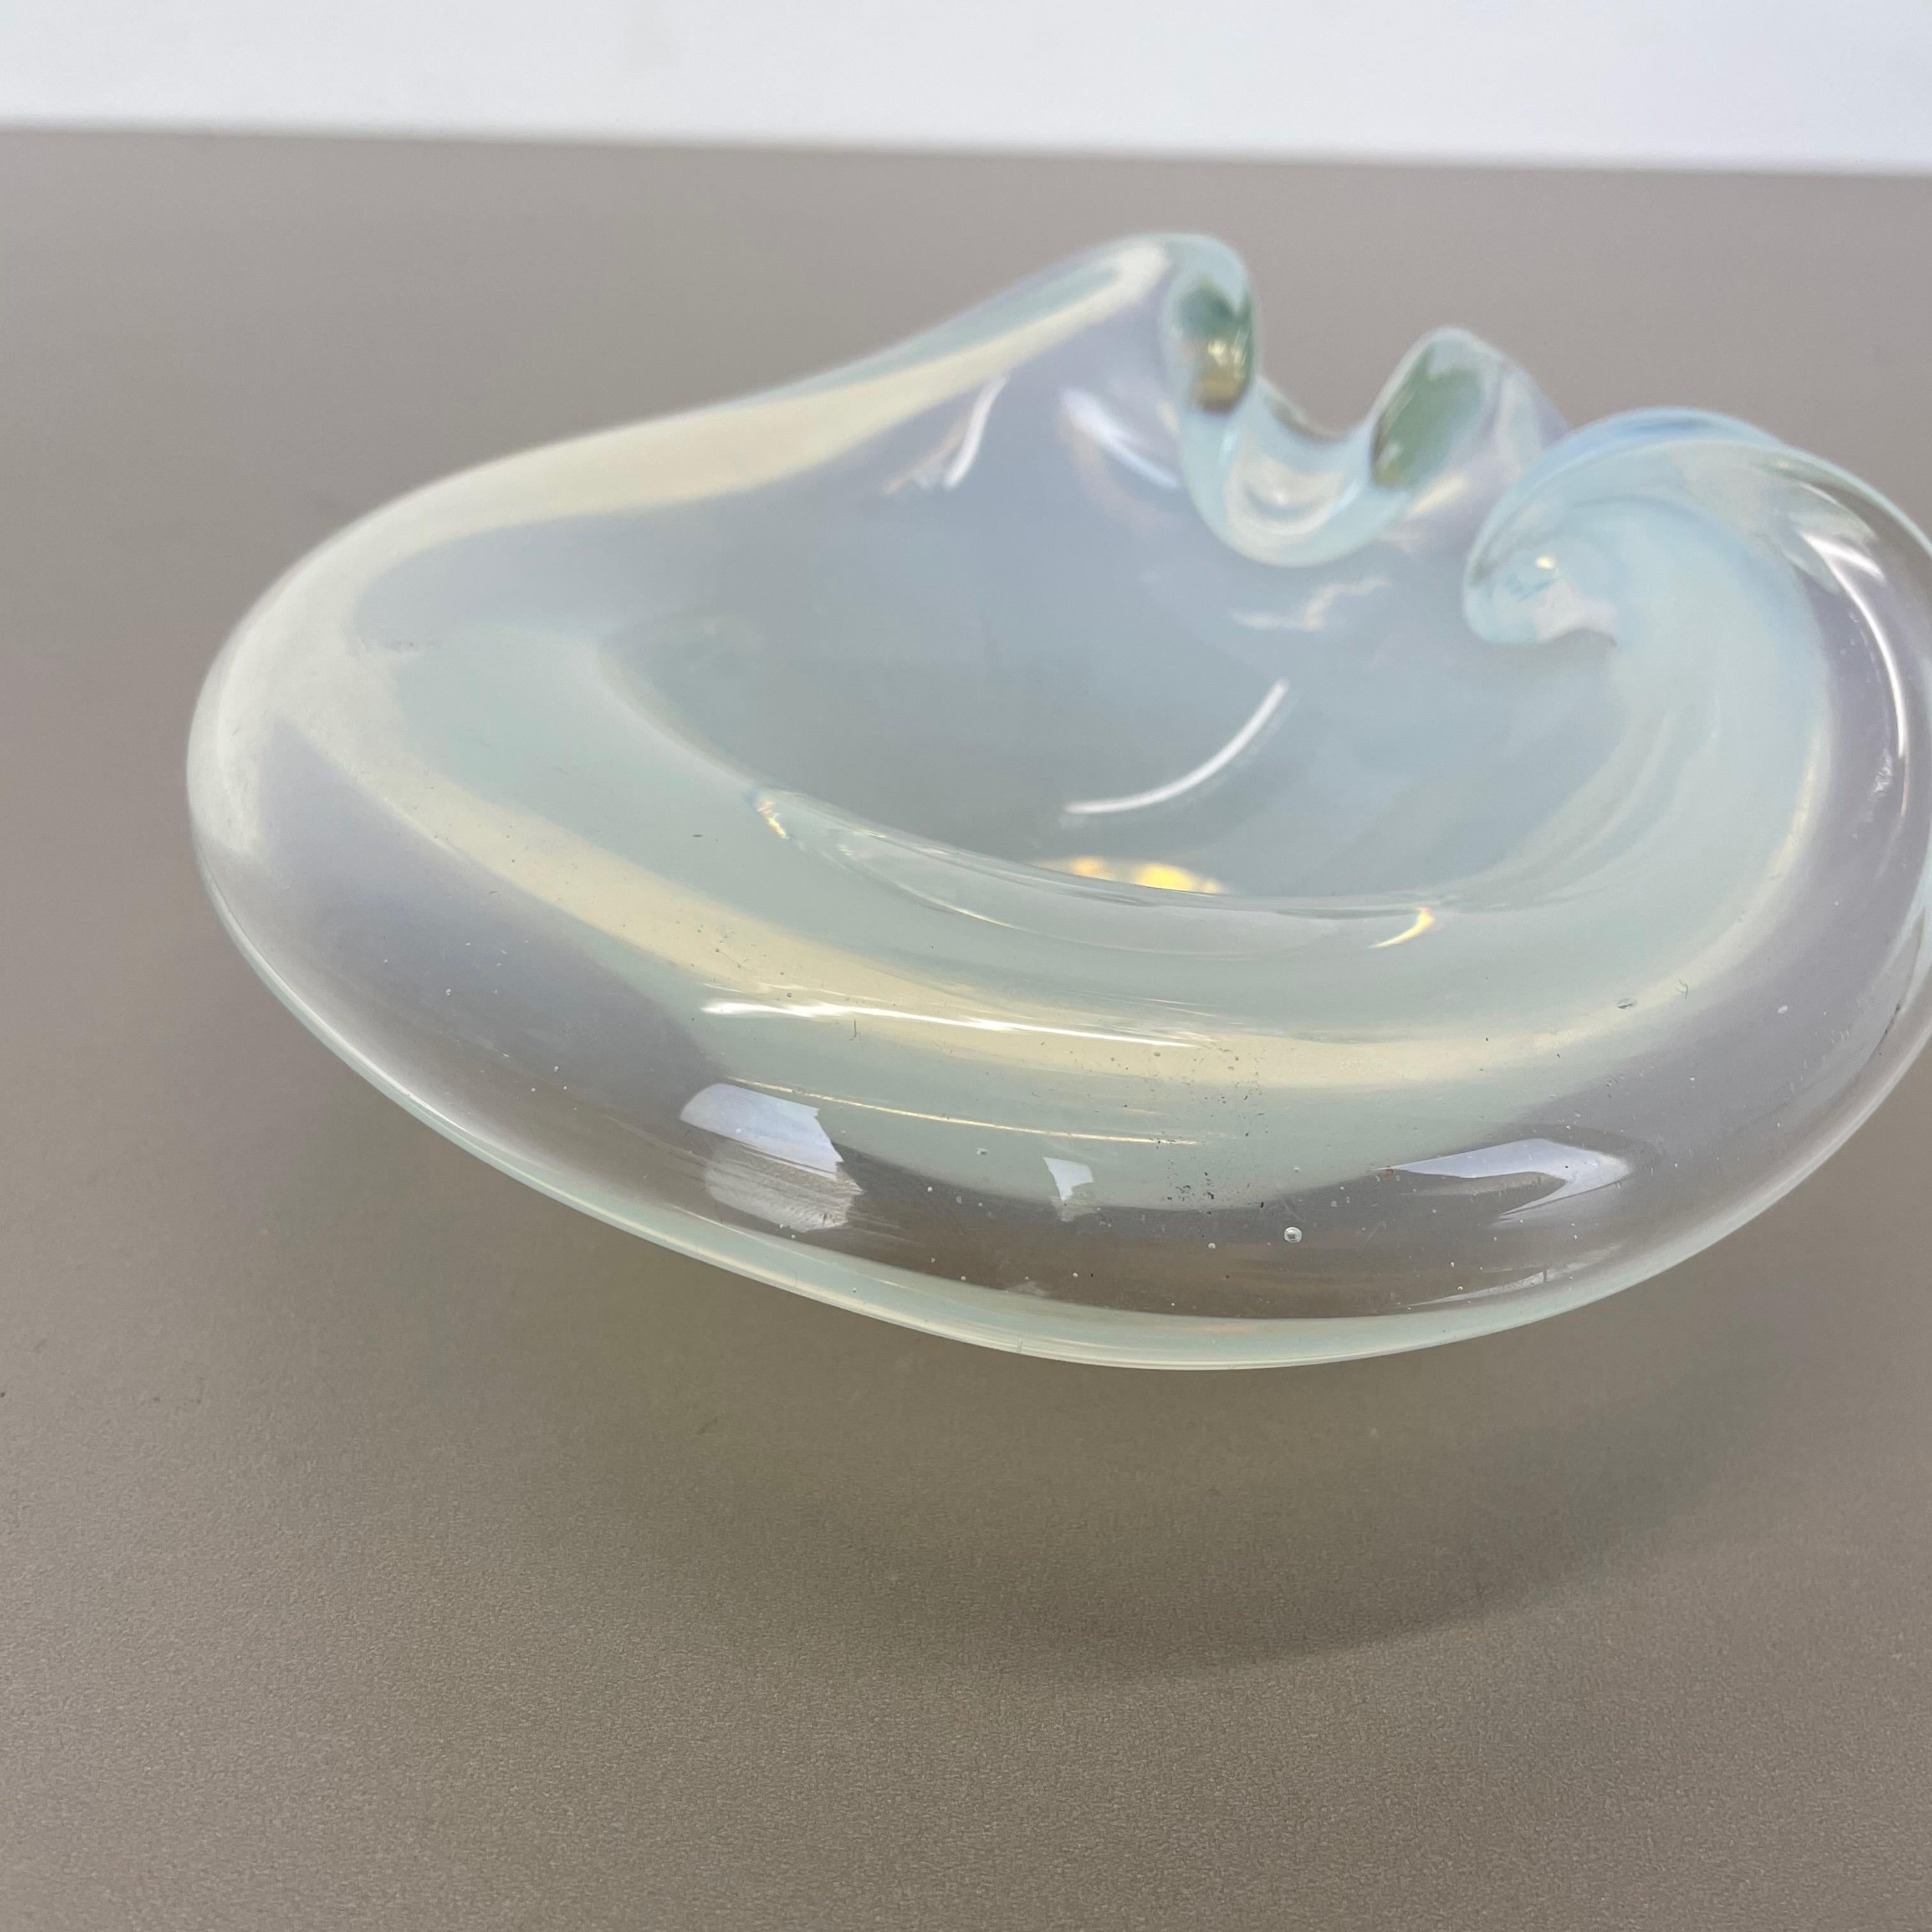 Set of 2 New Old Stock, Murano Glass Shell Bowl by Antonio da Ros Cenedese, 1960 For Sale 9